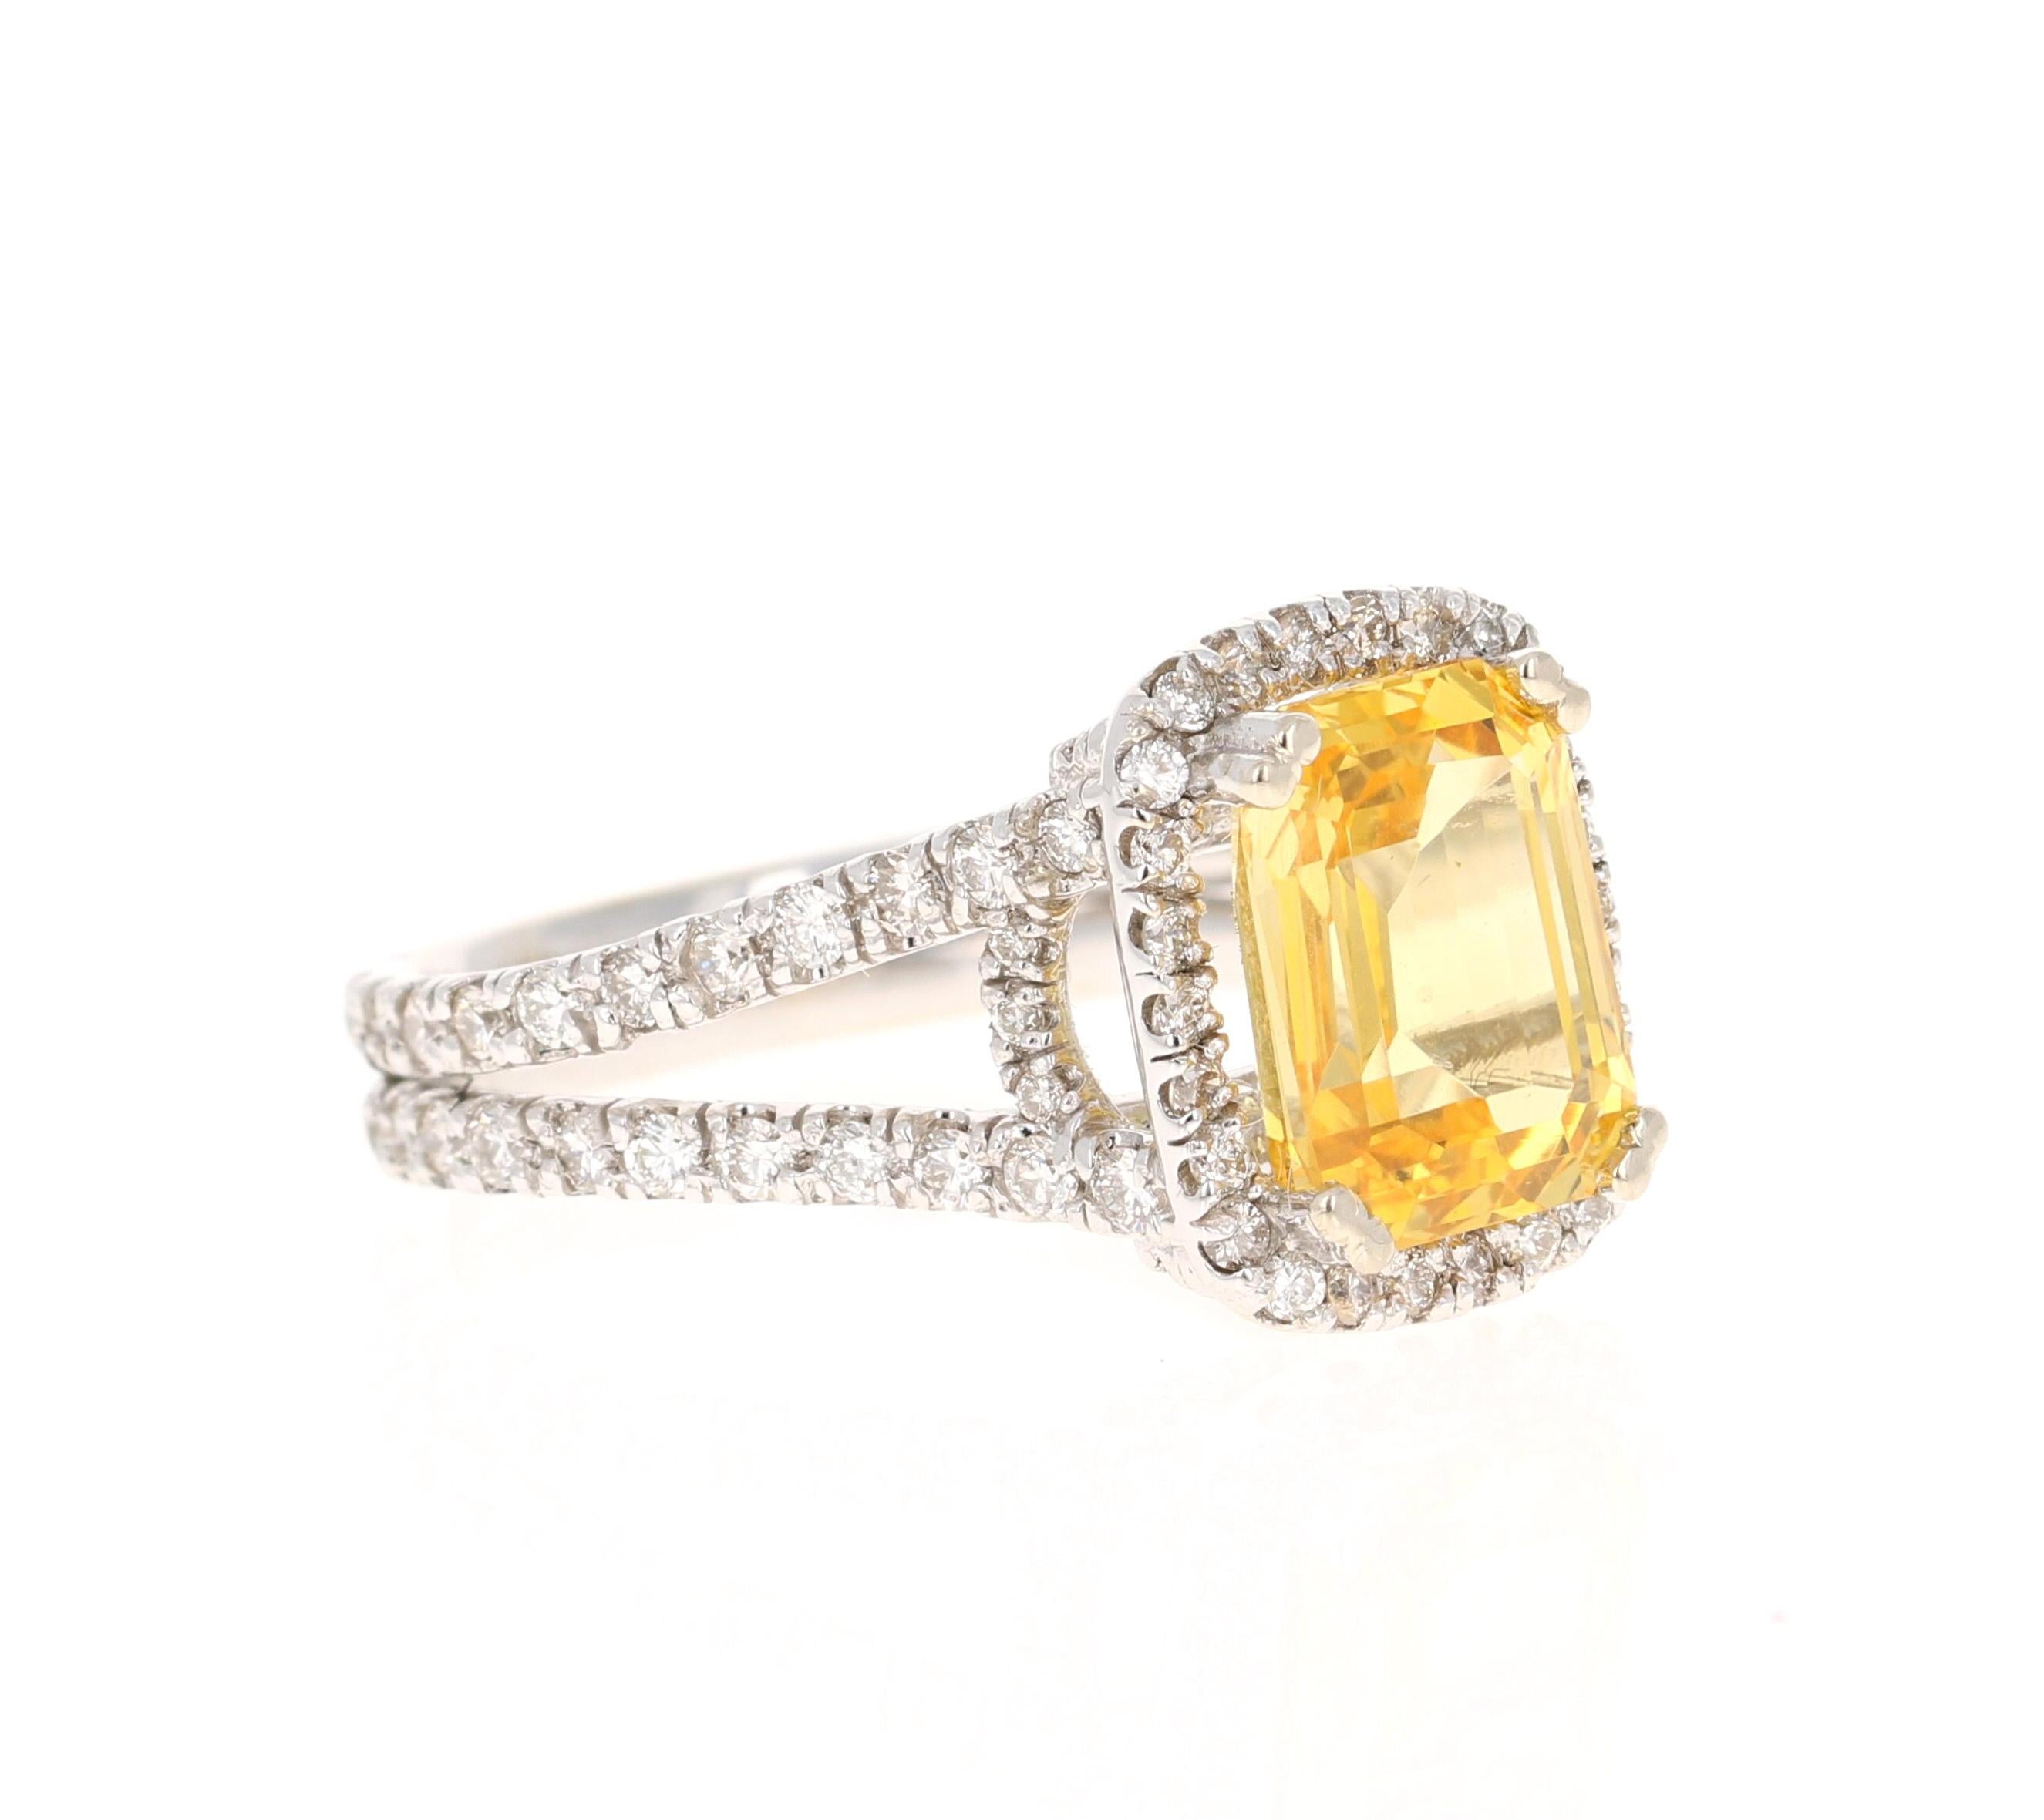 Classic Yellow Sapphire Halo Diamond Ring! 

This beautiful ring has a Emerald Cut Yellow Sapphire that weighs 5.27 Carats. It has a Halo of 94 Round Cut Diamonds that weigh 1.23 Carats. (Clarity: VS, Color: H)
The Emerald Cut Yellow Sapphire is GIA